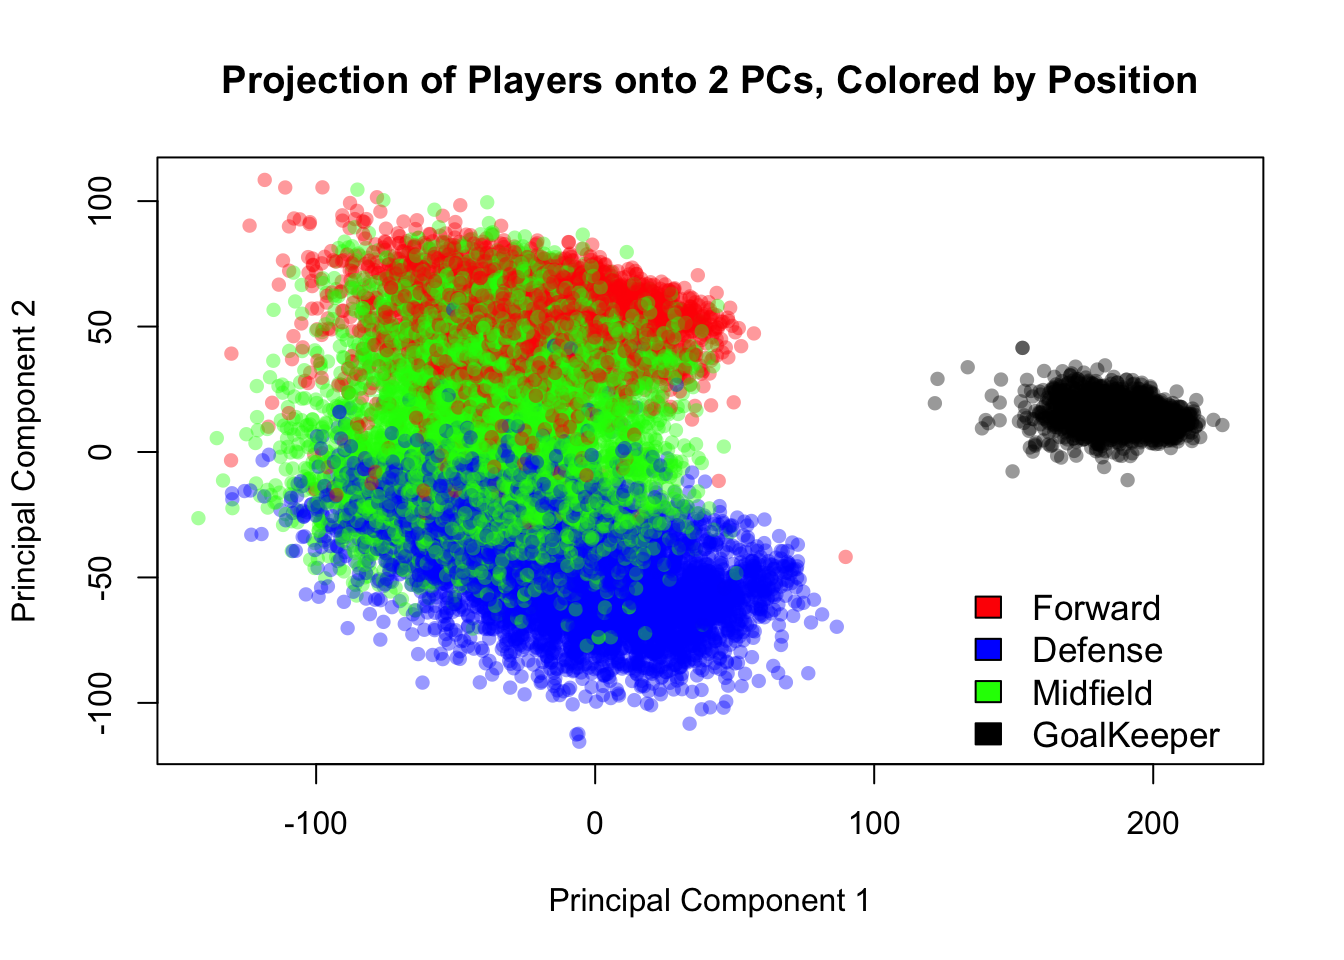 Projection of the FIFA players' skill data into 2 dimensions. Player positions are evident.